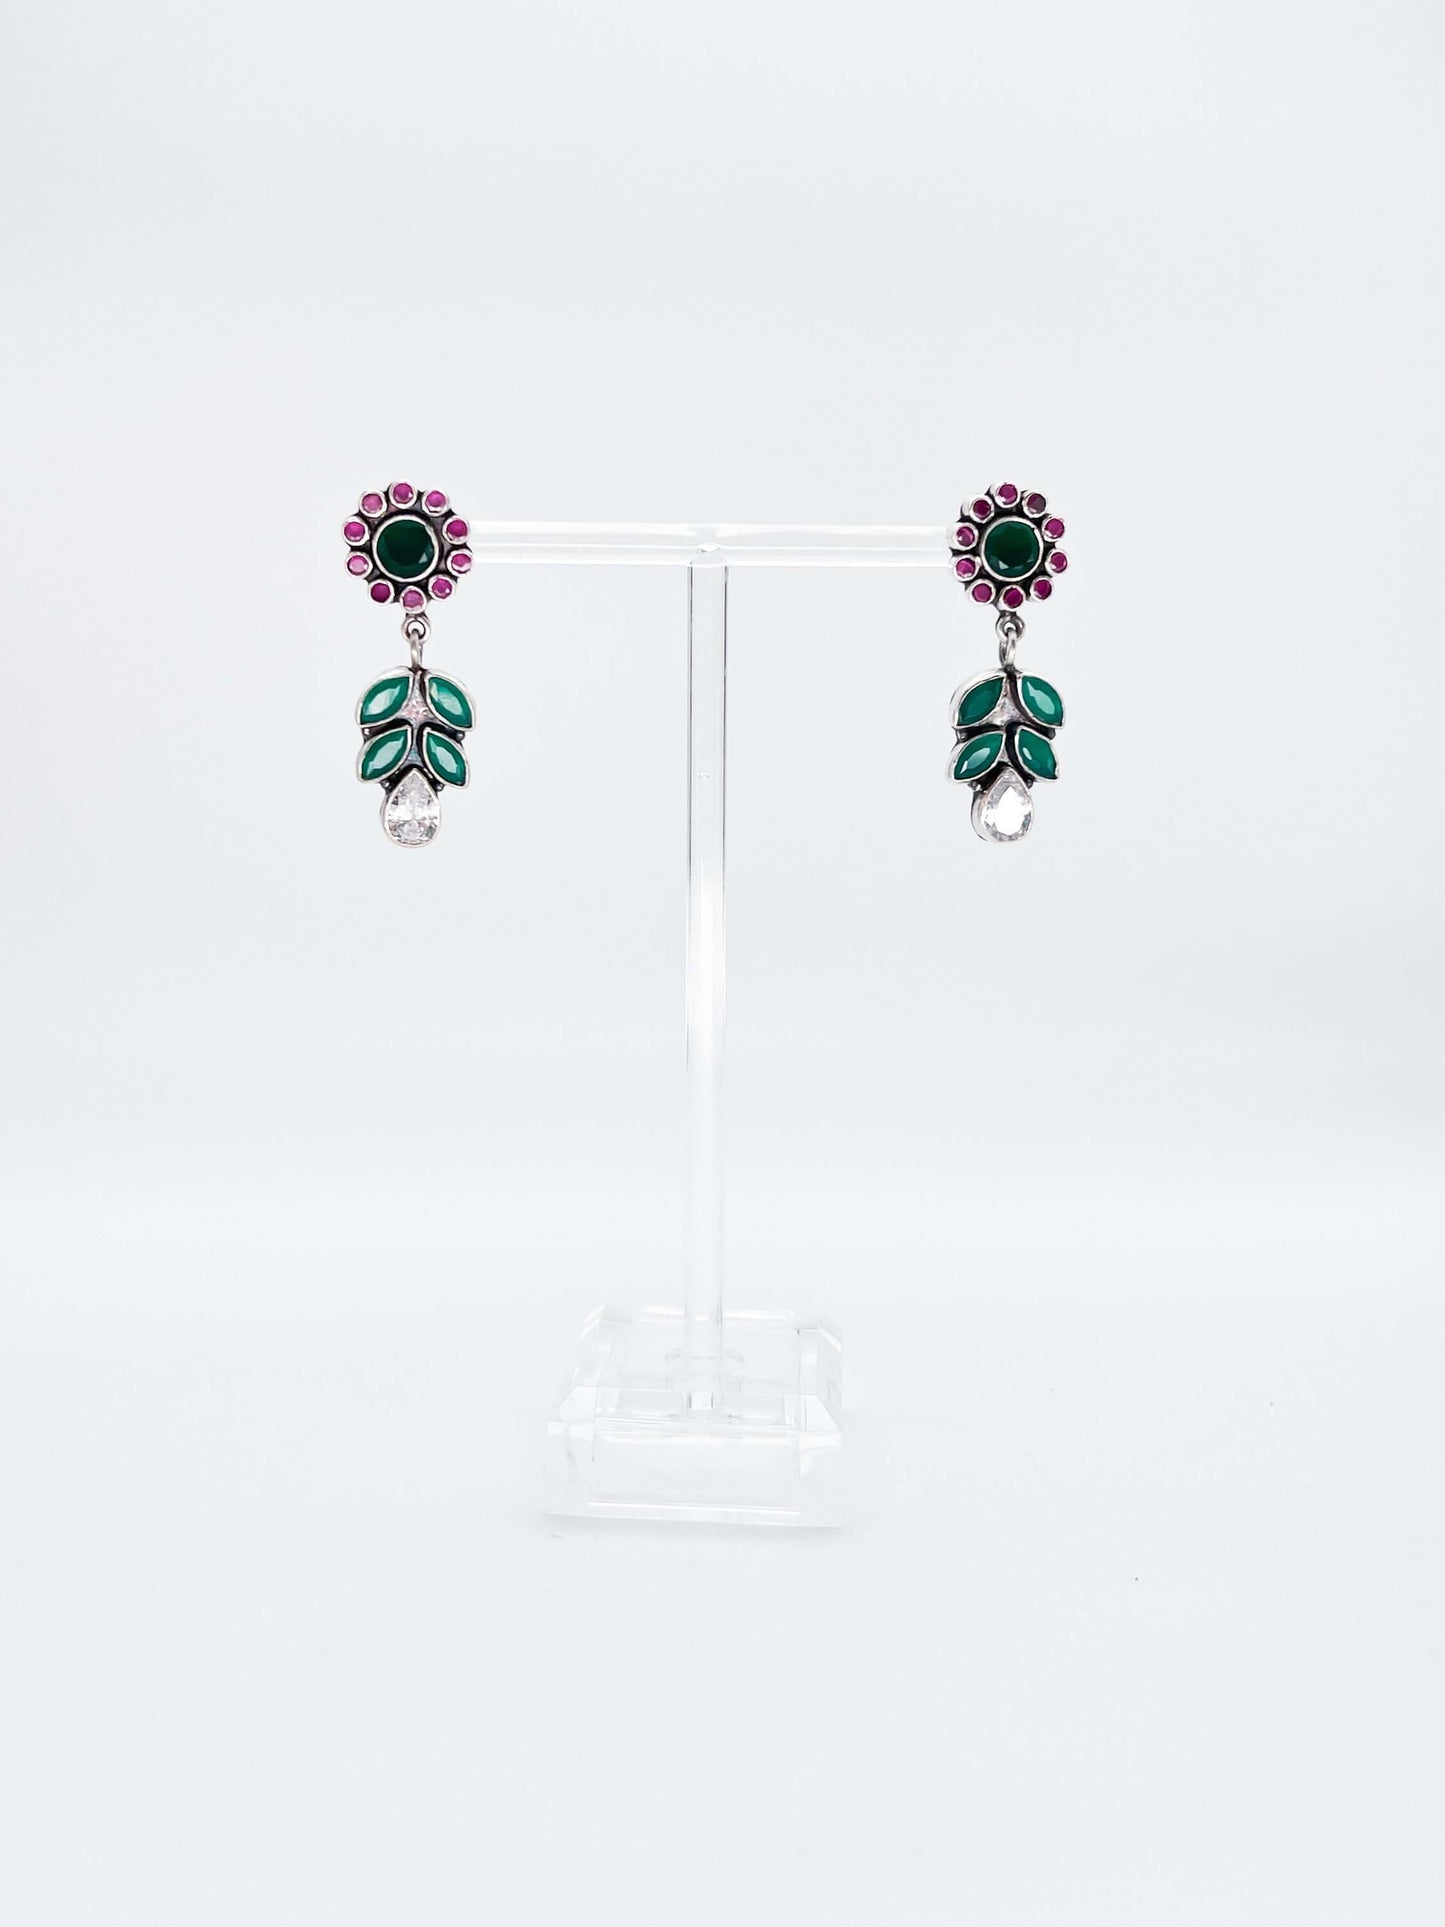 Bela silver eardrops with green and pink glass stone